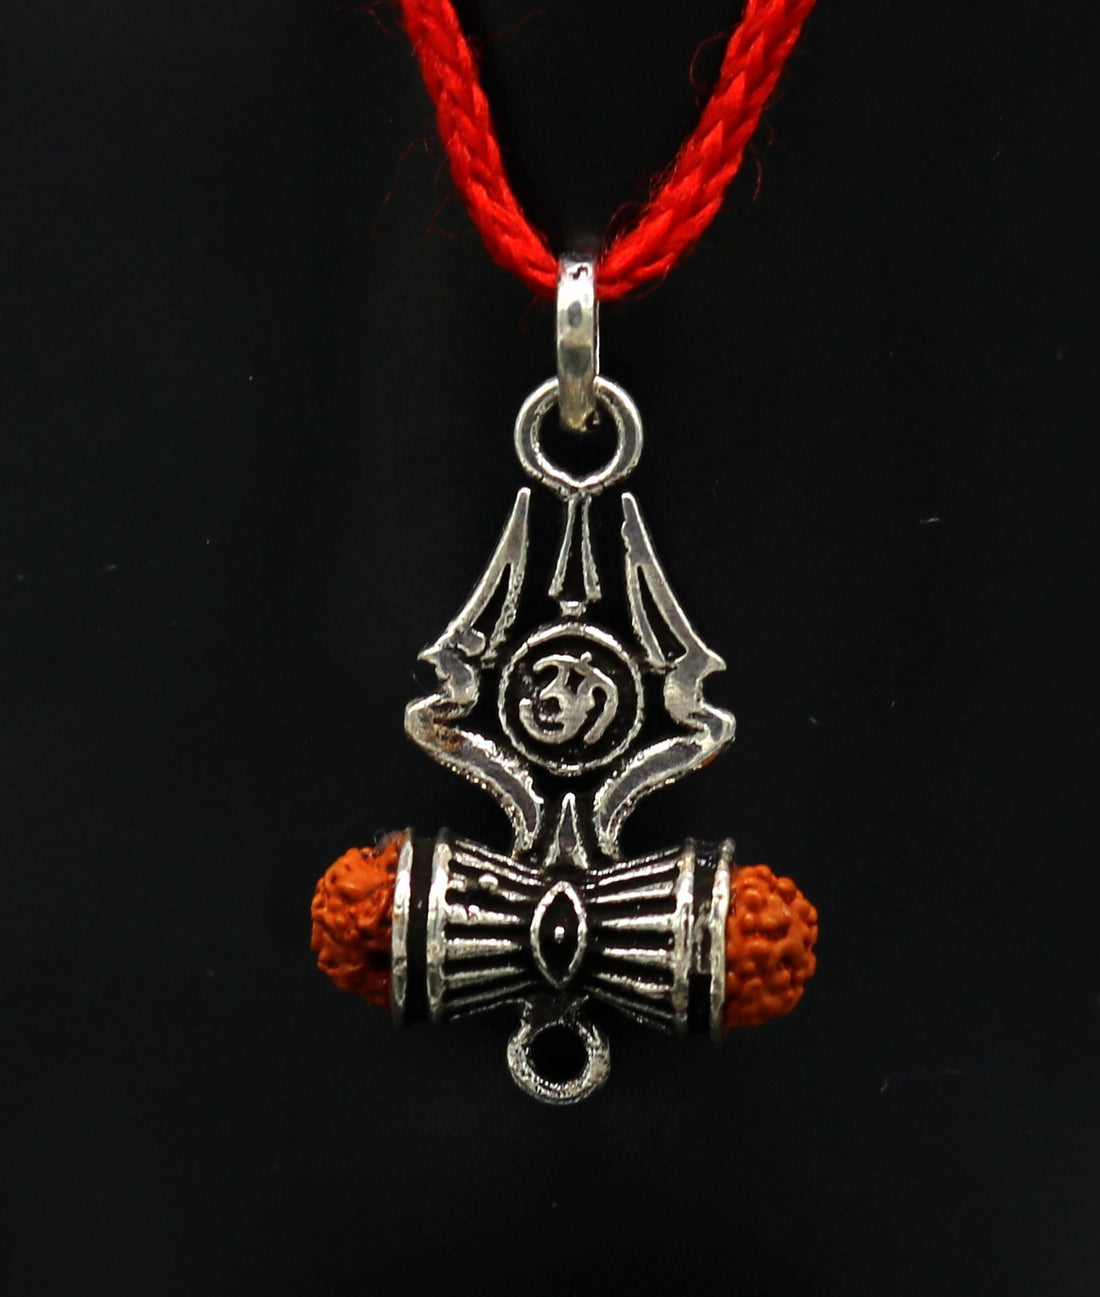 925 sterling silver lord shiva trident pendant, amazing customized Rudraksha trishul tribal belly dance personalized jewelry ssp322 - TRIBAL ORNAMENTS